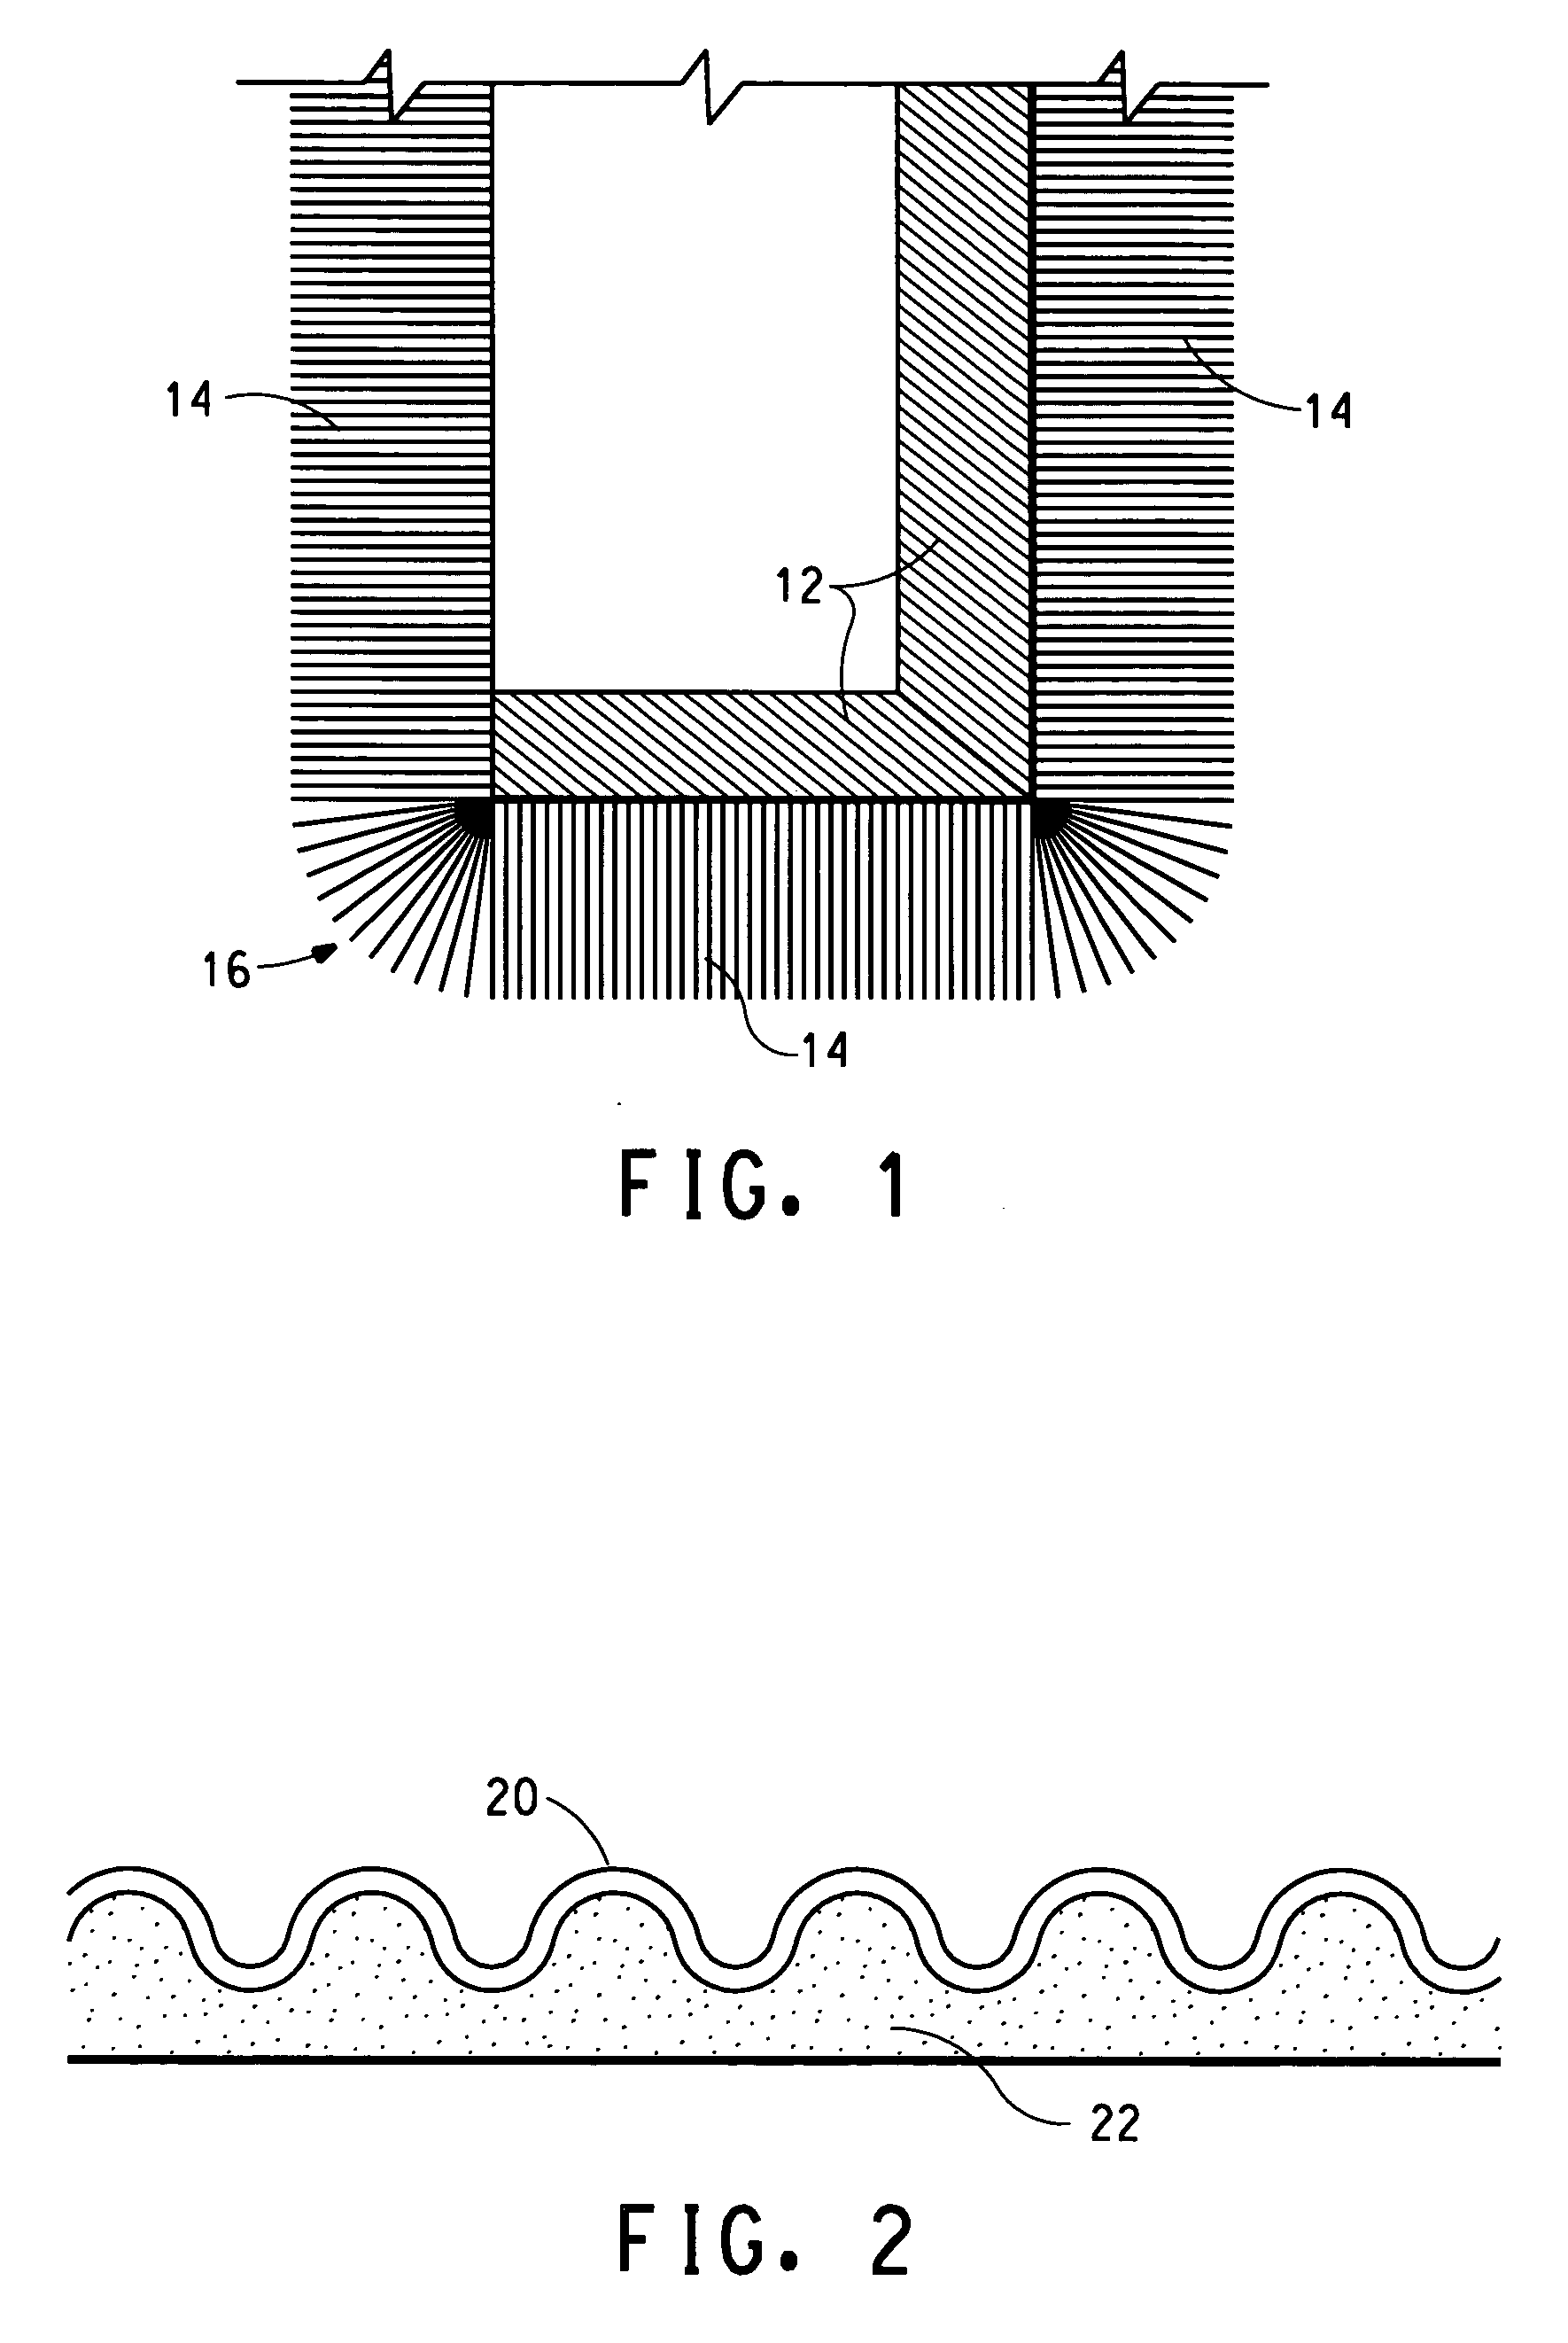 Self-adhering flashing system having high extensibility and low retraction